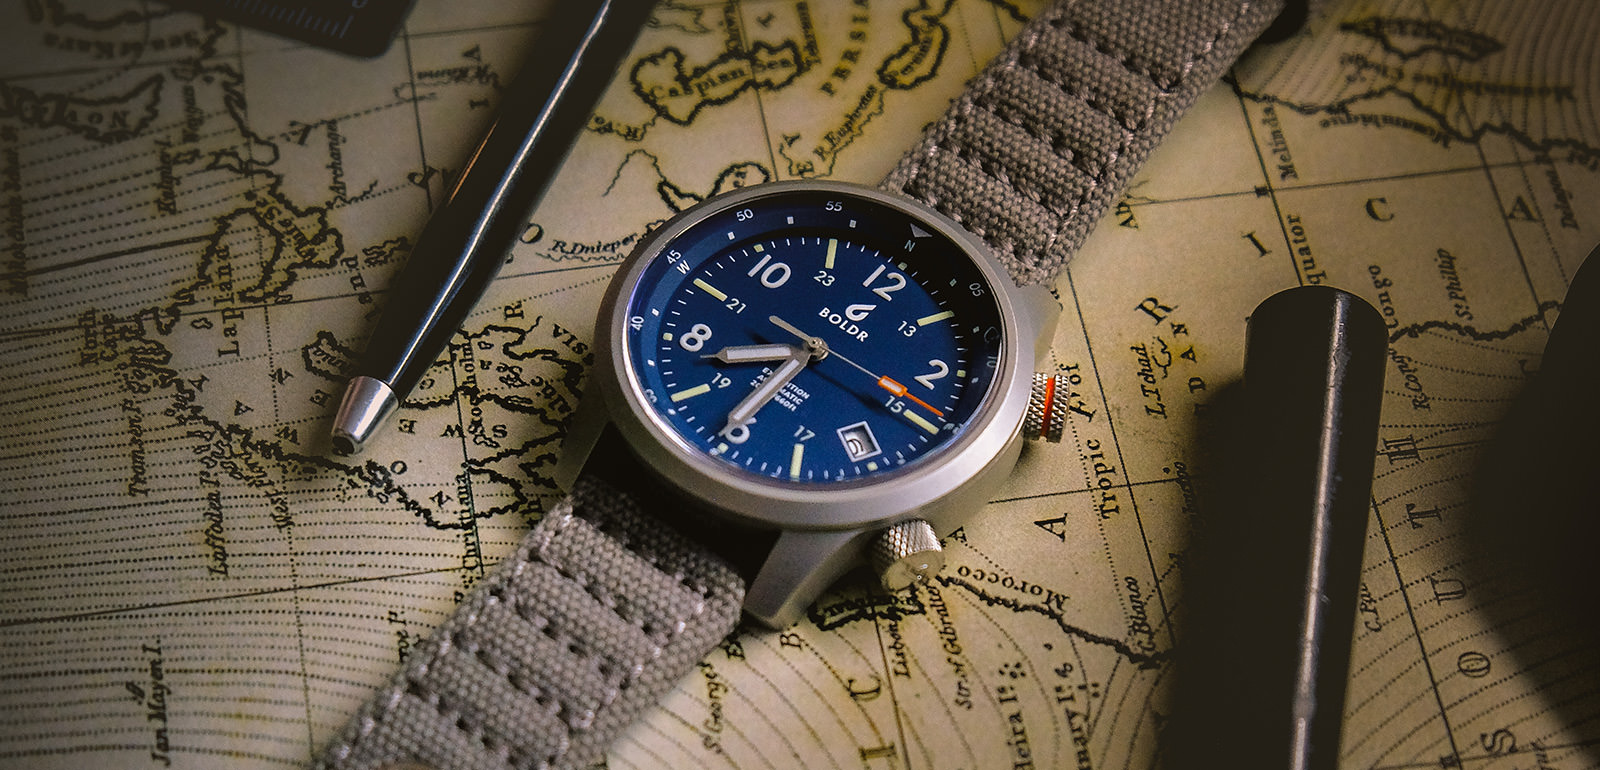 Watch Review: Boldr Field Medic – Time to Blog Watches